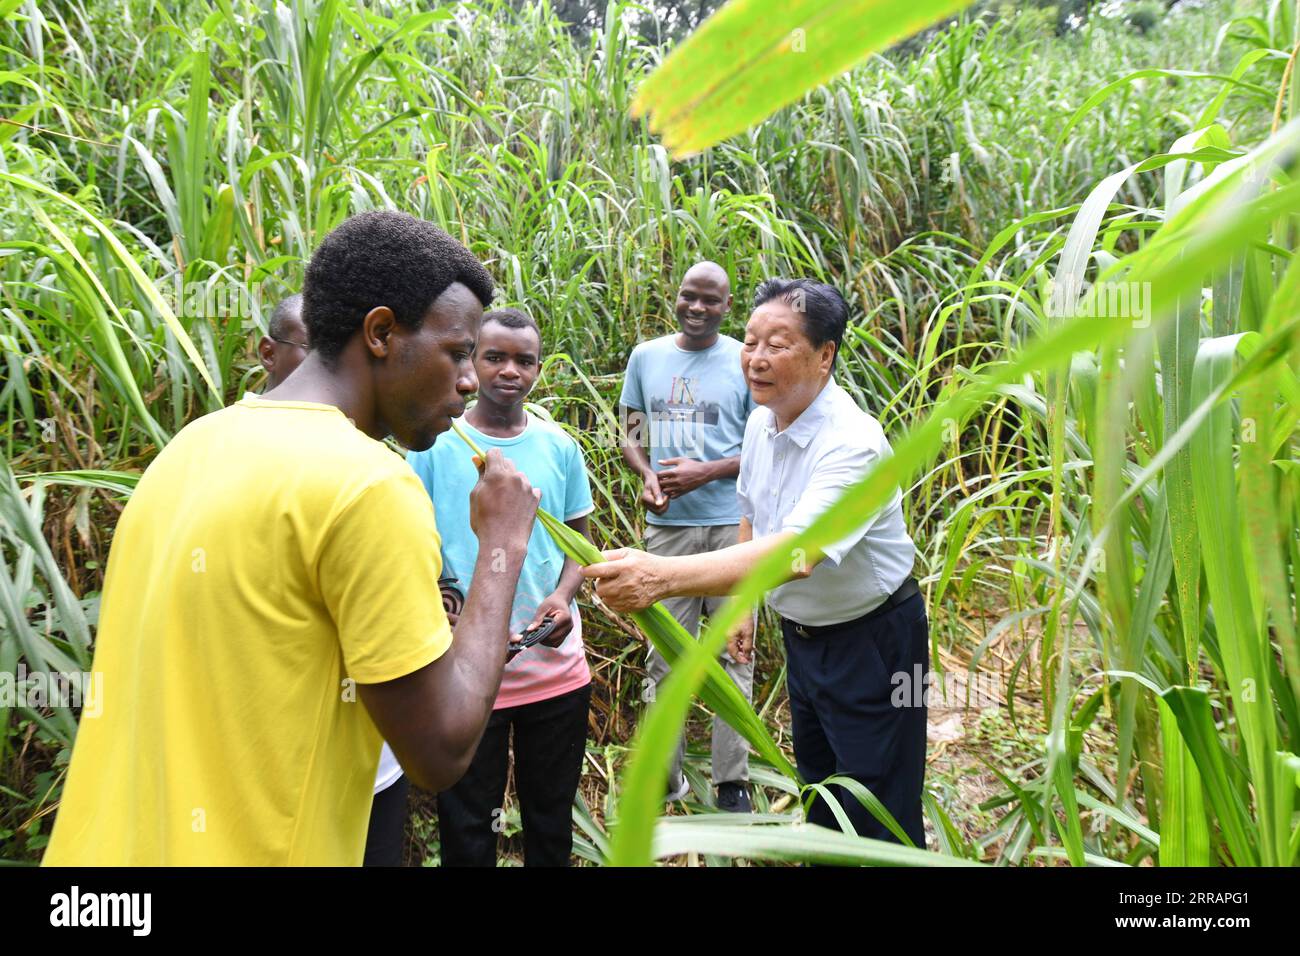 210812 -- FUZHOU, Aug. 12, 2021 -- Rwandan student Obed Niyimbabazi 1st L tastes tender Juncao grass in Fuzhou, southeast China s Fujian Province, Aug. 12, 2021. China has shared the agricultural technology with over 100 countries. Its use can help increase local income through low-cost mushroom cultivation and contain desertification. Fujian Agriculture and Forestry University has trained many experts of Juncao technology for African countries since it established the National Engineering Research Center of Juncao.  CHINA-FUJIAN-FUZHOU-AFRICAN STUDENTS-JUNCAO CN LinxShanchuan PUBLICATIONxNOTx Stock Photo